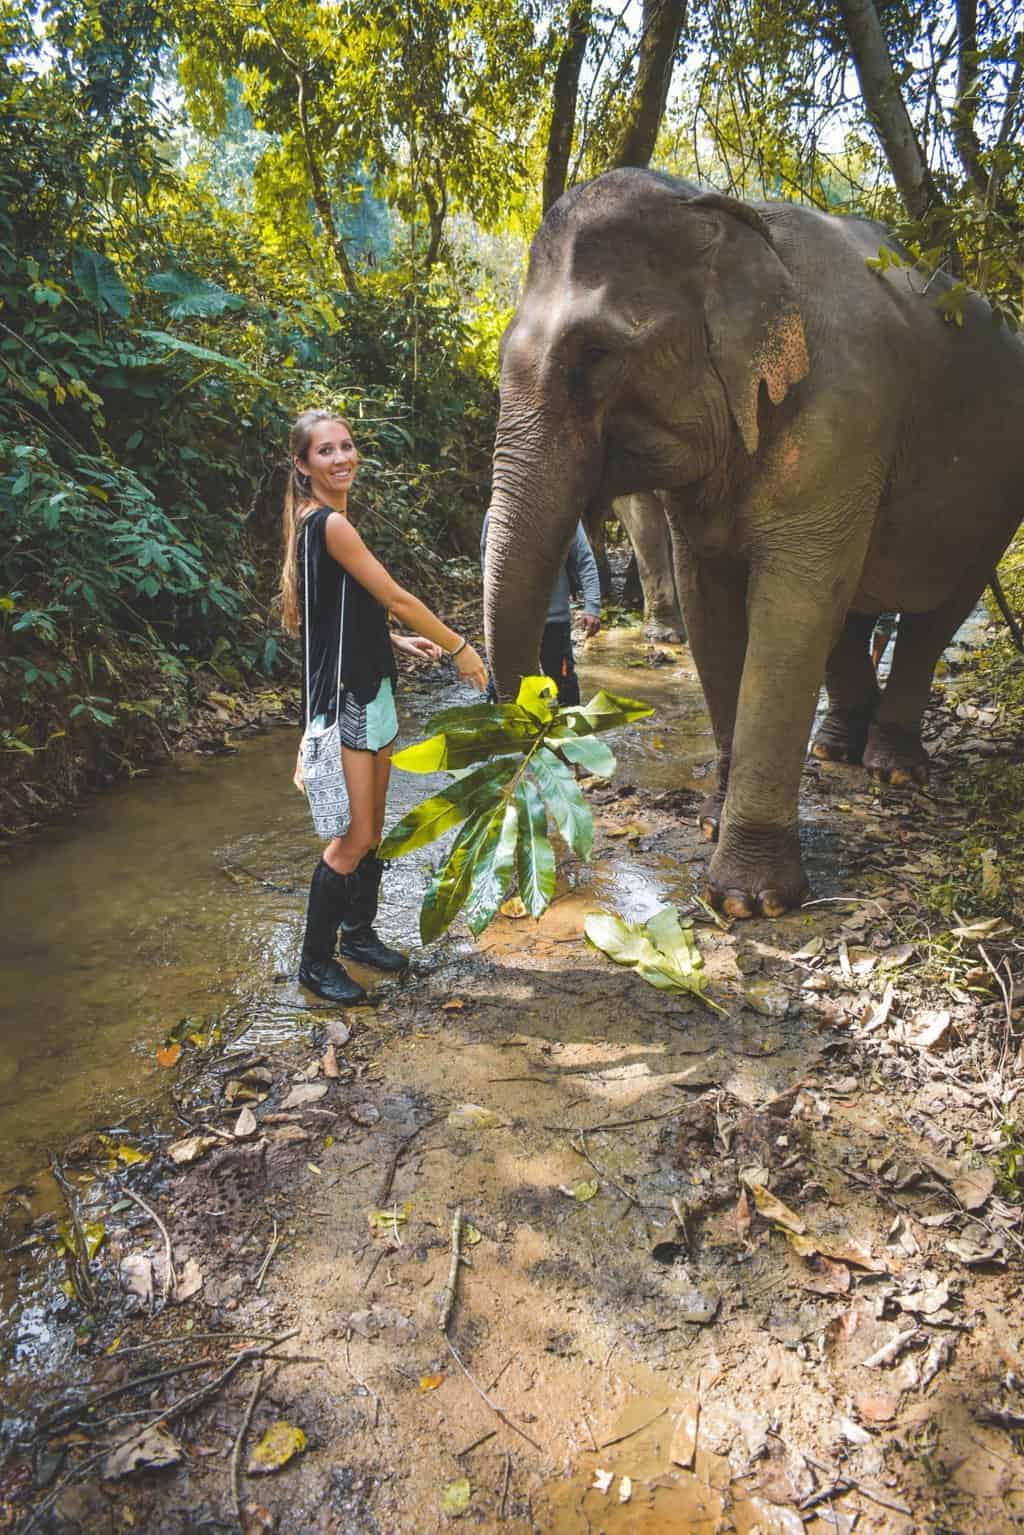 Ethical elephant experience in Luang Prabang